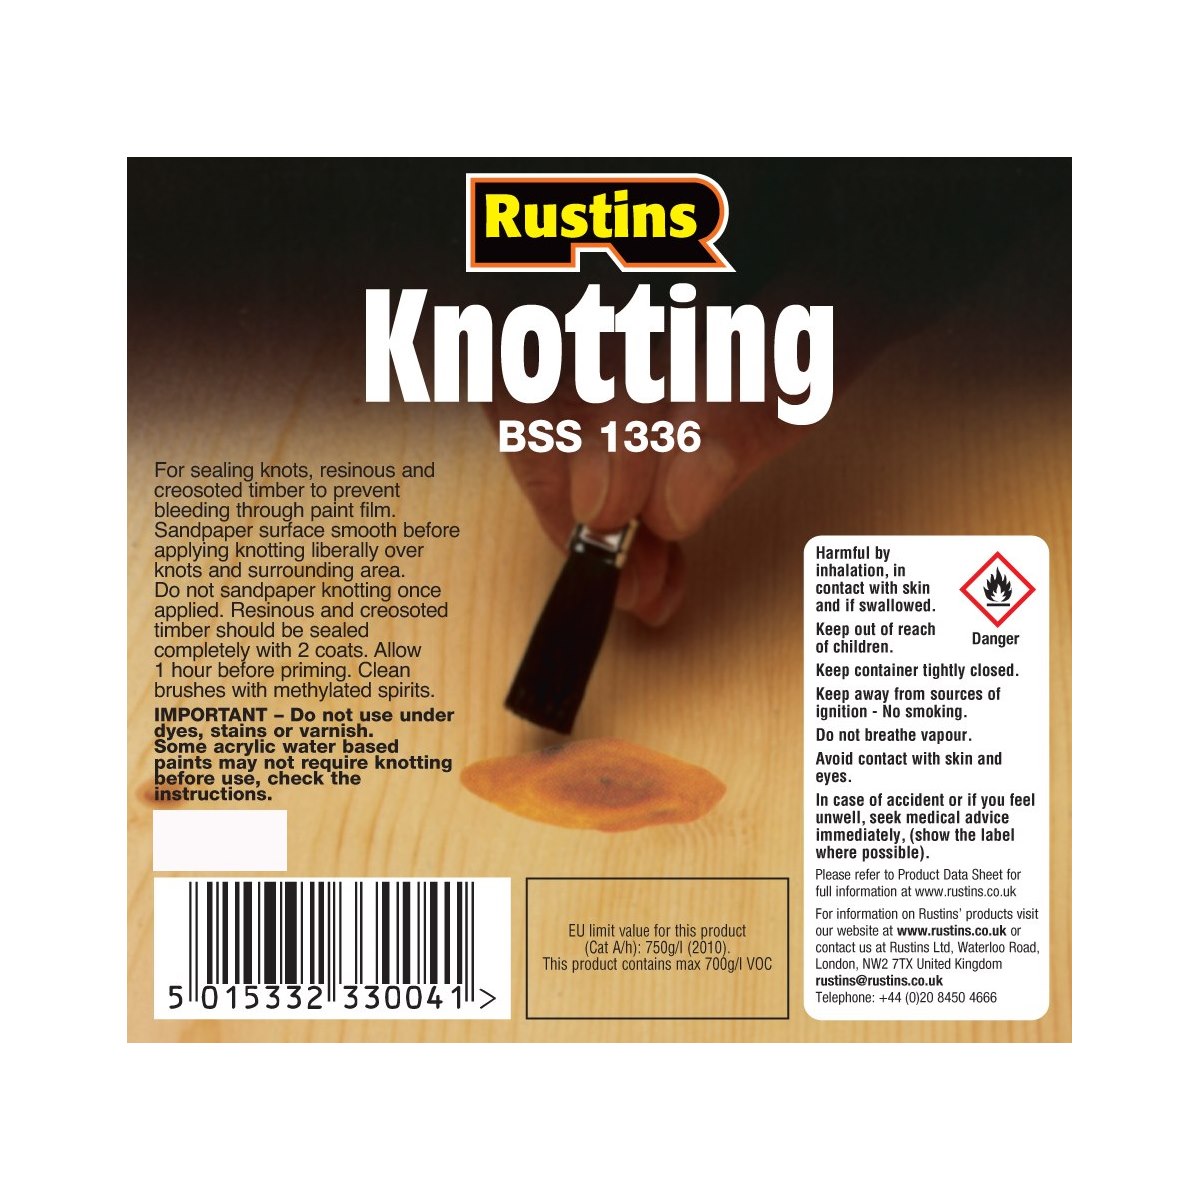 Rustins Knotting for sealing knots